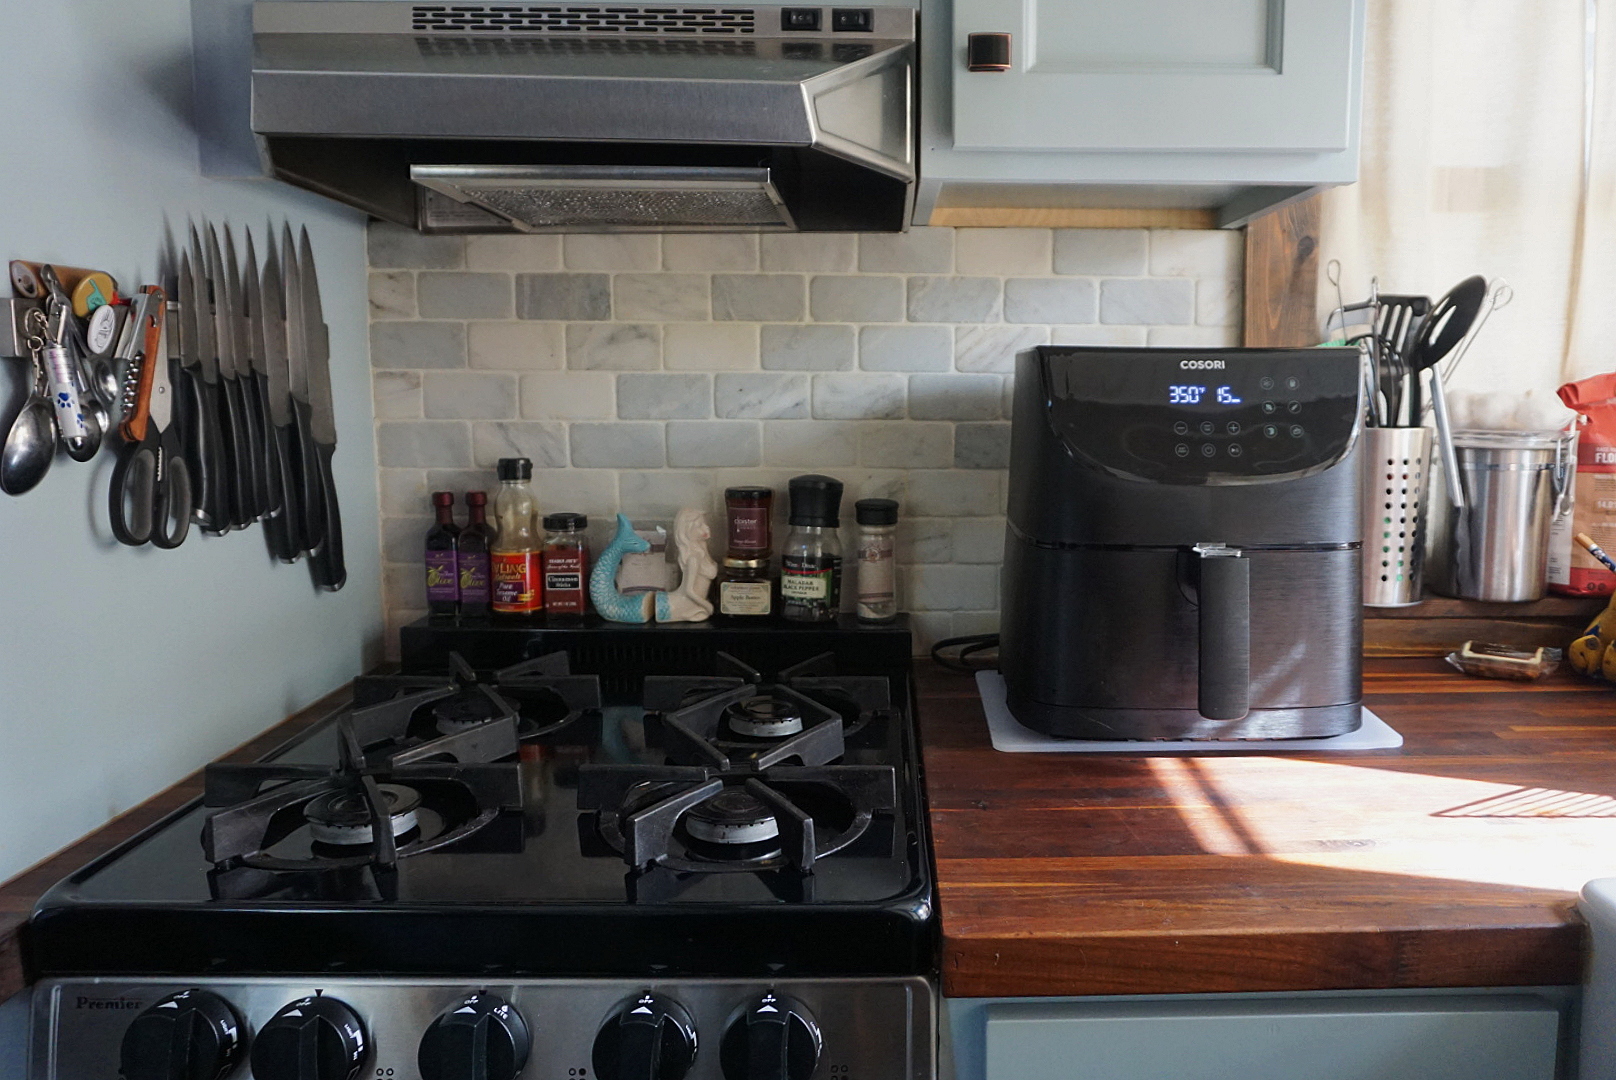 Review: COSORI 5.8QT Air Fryer From